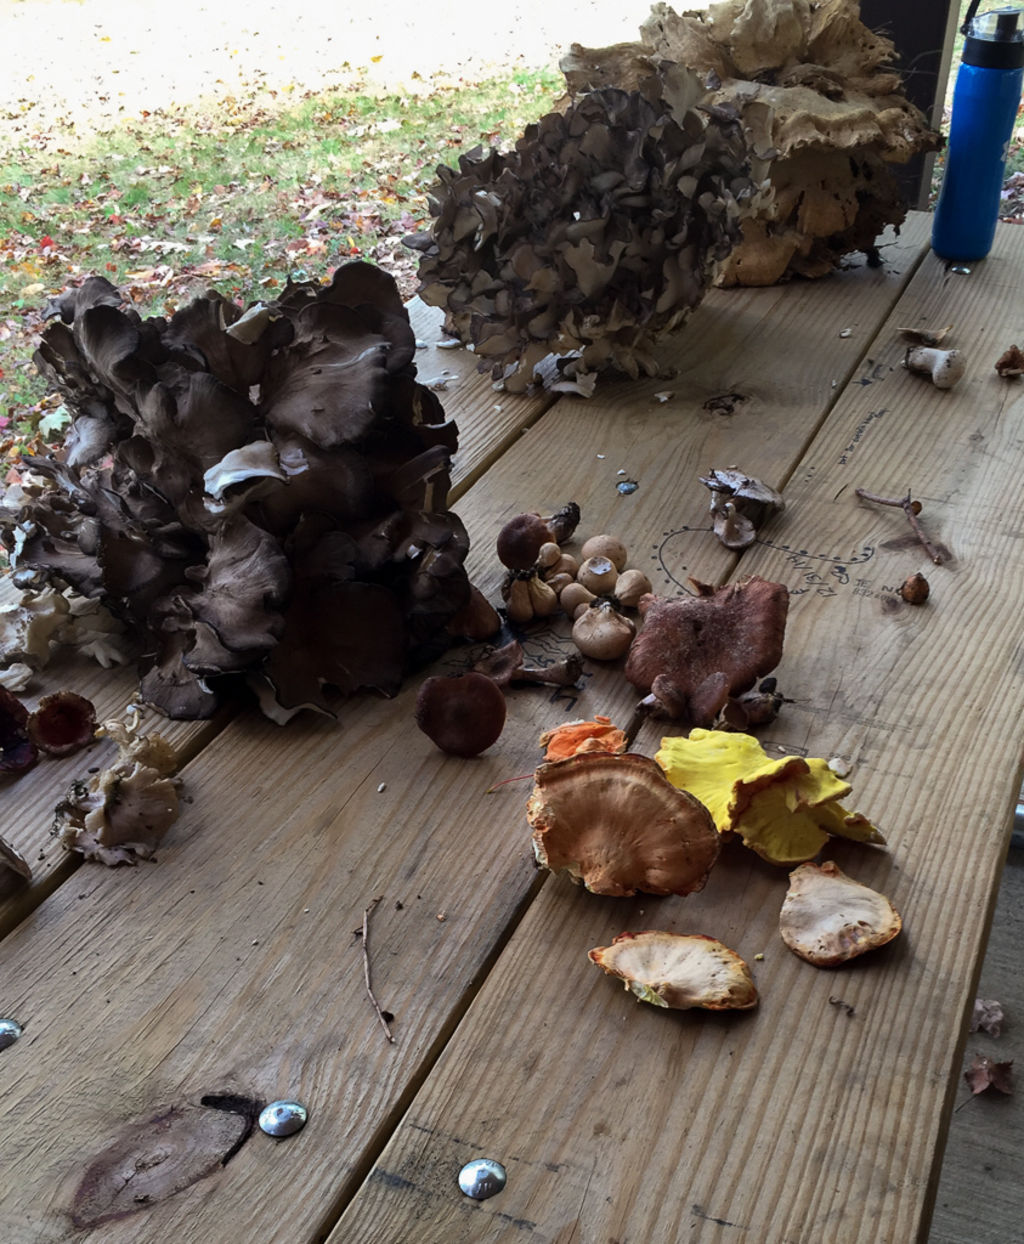 Mushroom Identification and Cooking at Blue Knob State Park, Buck Hill Amphitheater